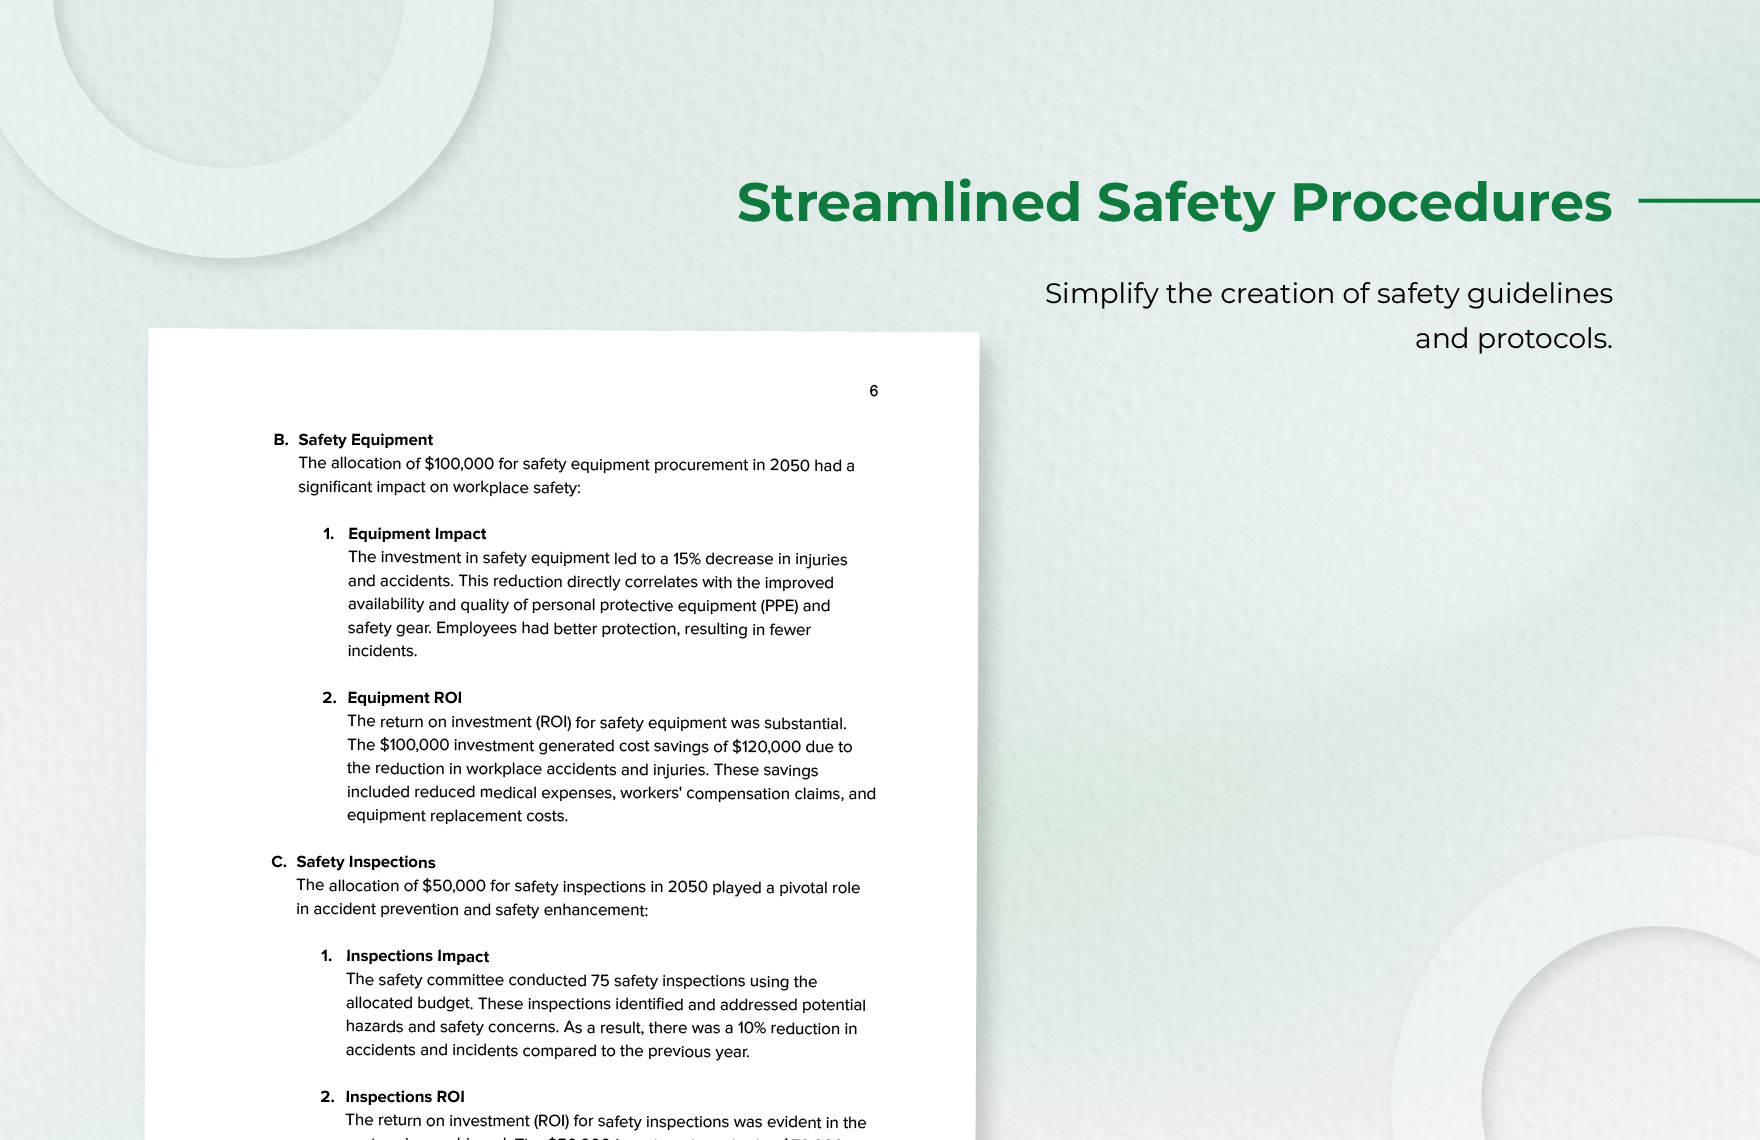 Health & Safety Committee Financial Analysis Template